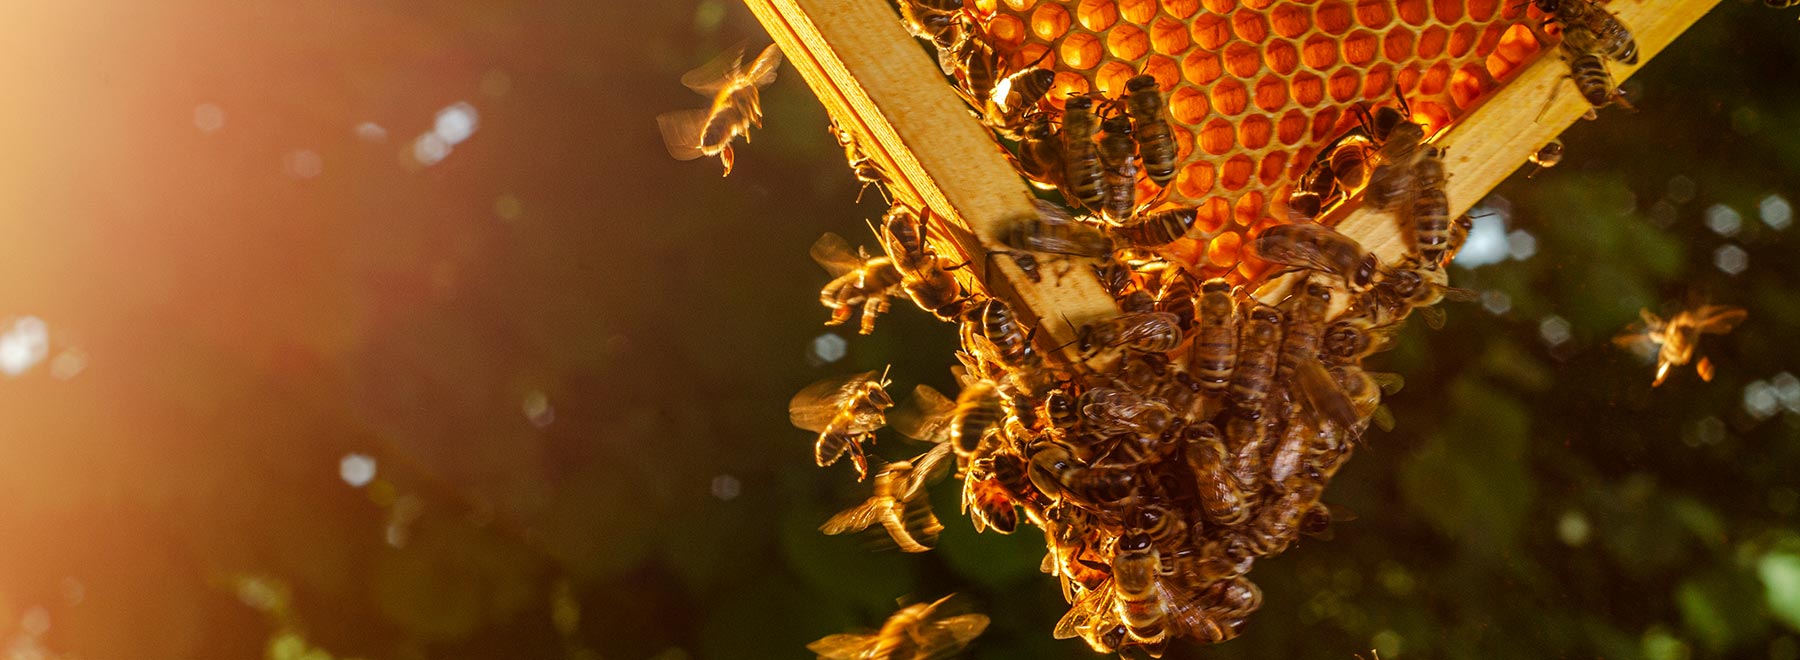 Bees flying around and gathering on a honey comb